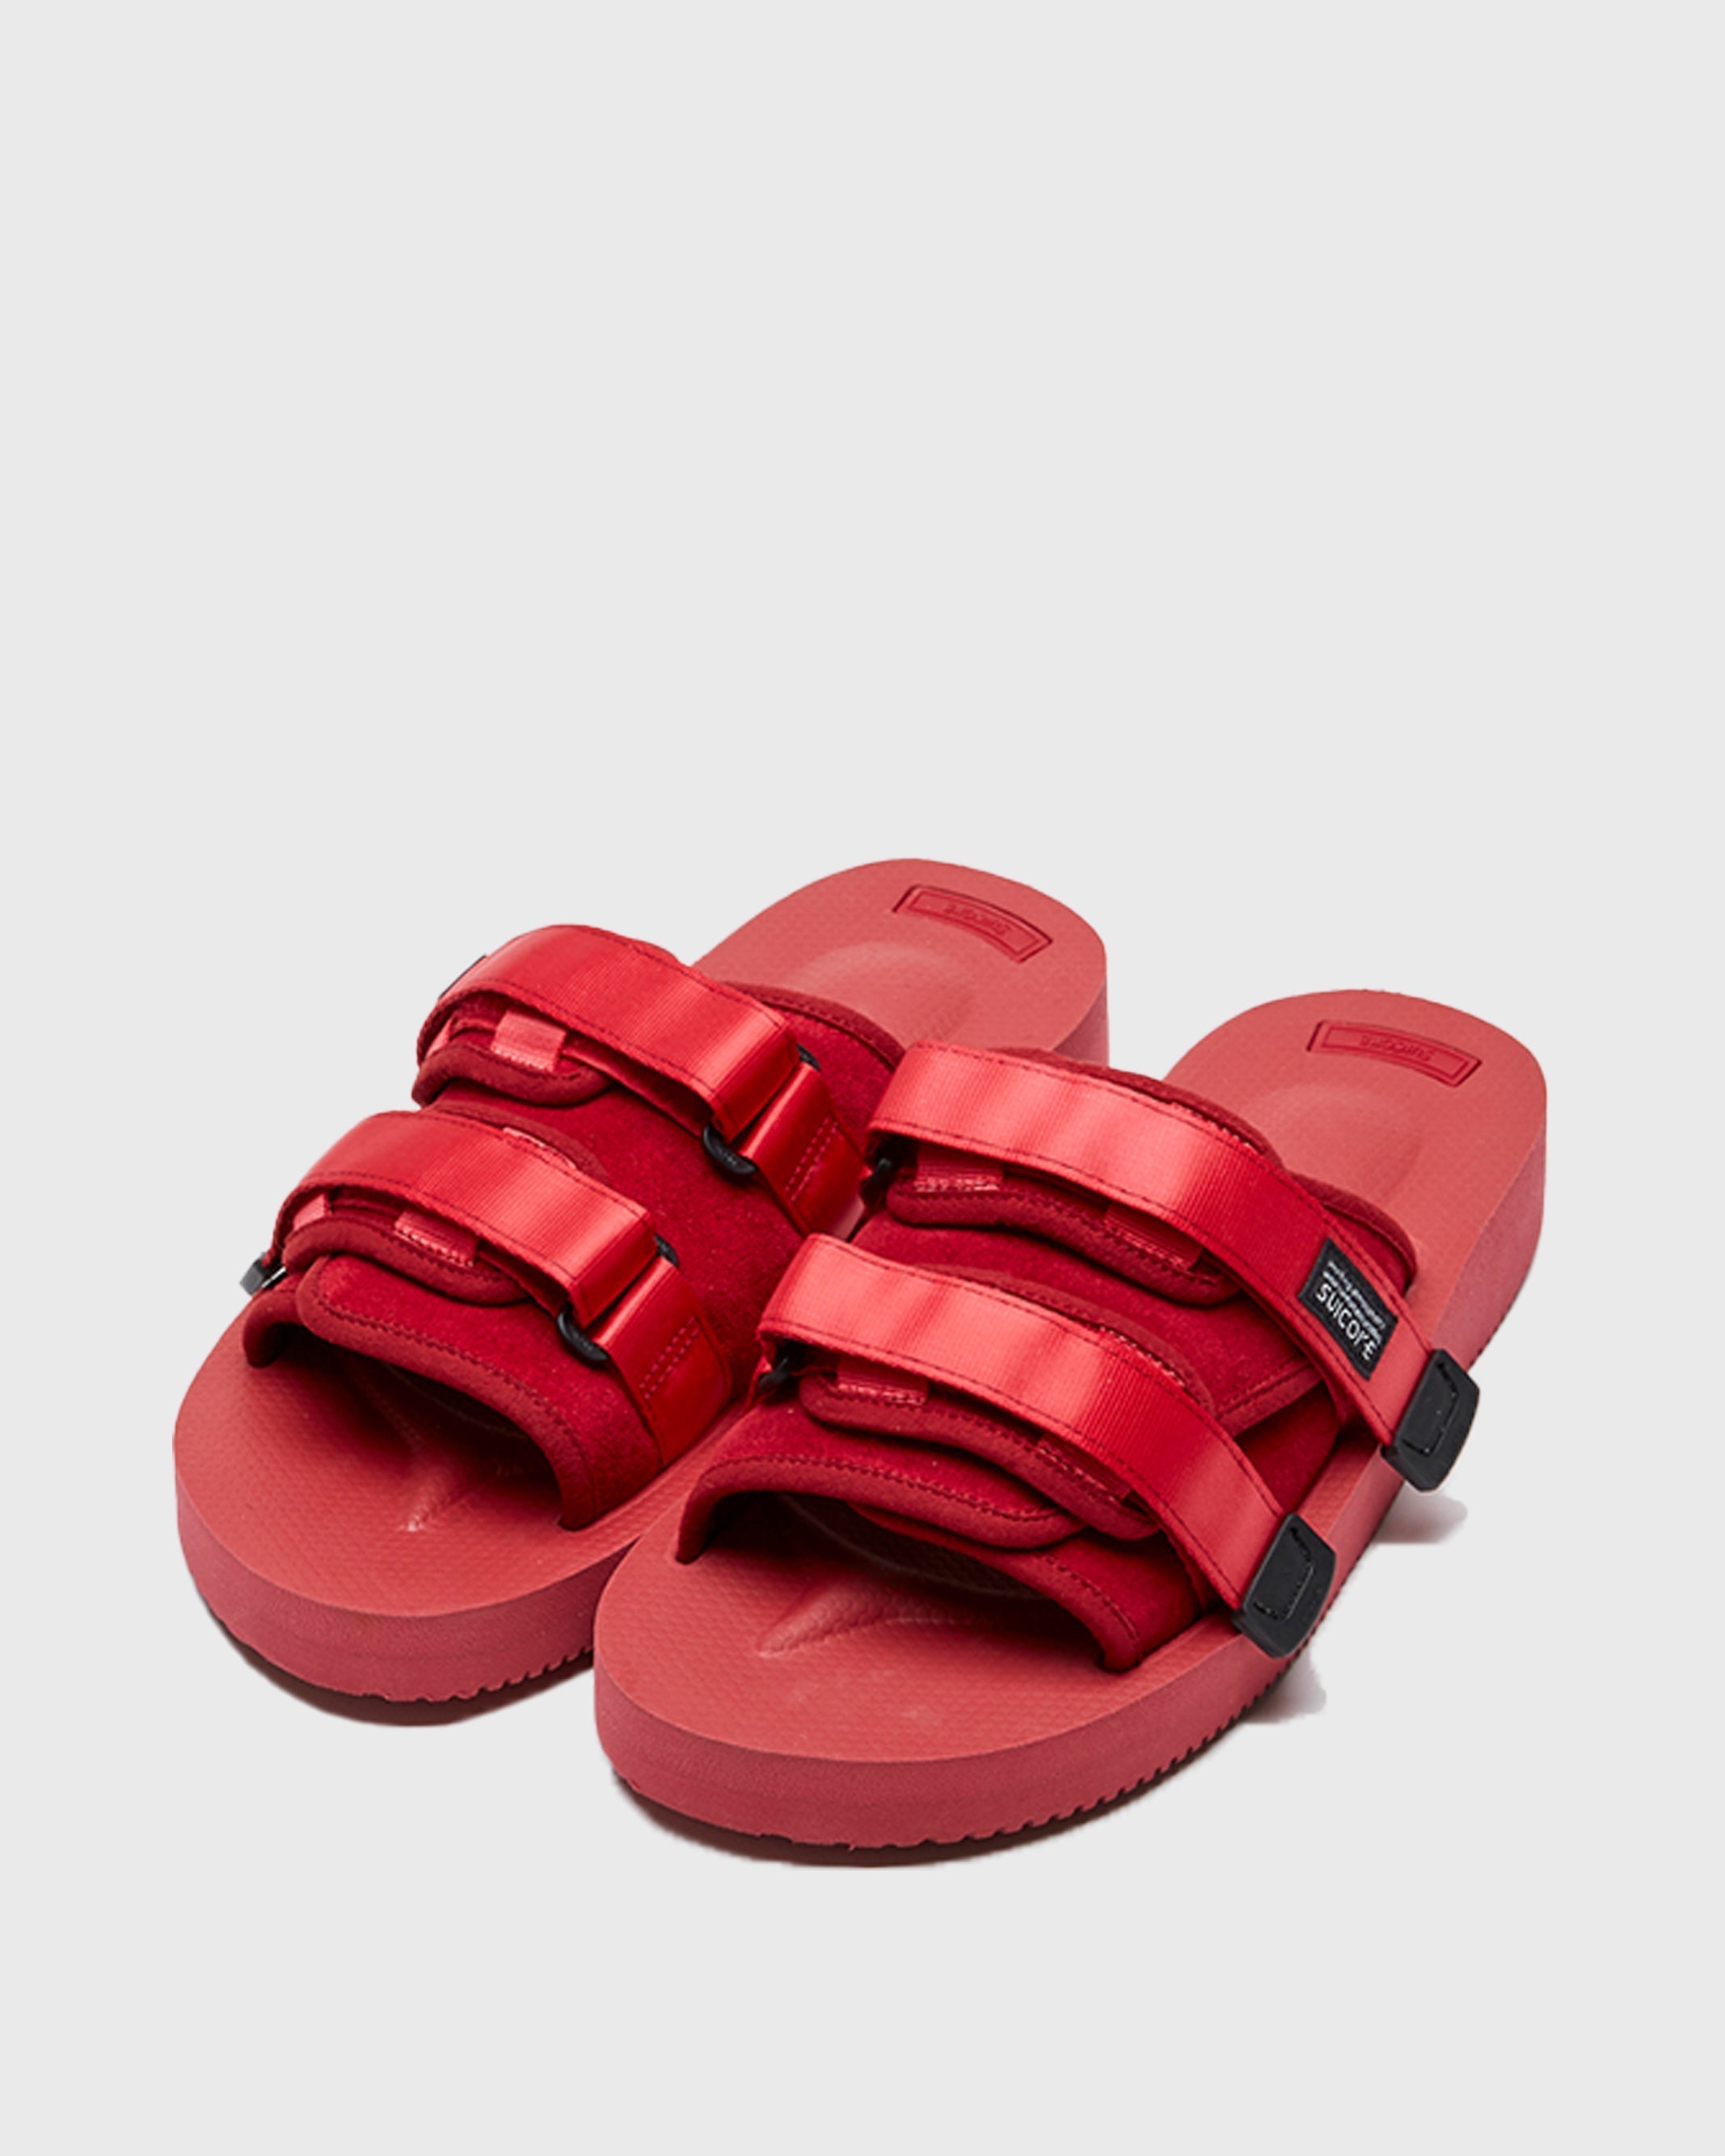 SUICOKE MOTO-VS in Red OG-056VS | Shop from eightywingold an official brand partner for SUICOKE Canada and US.